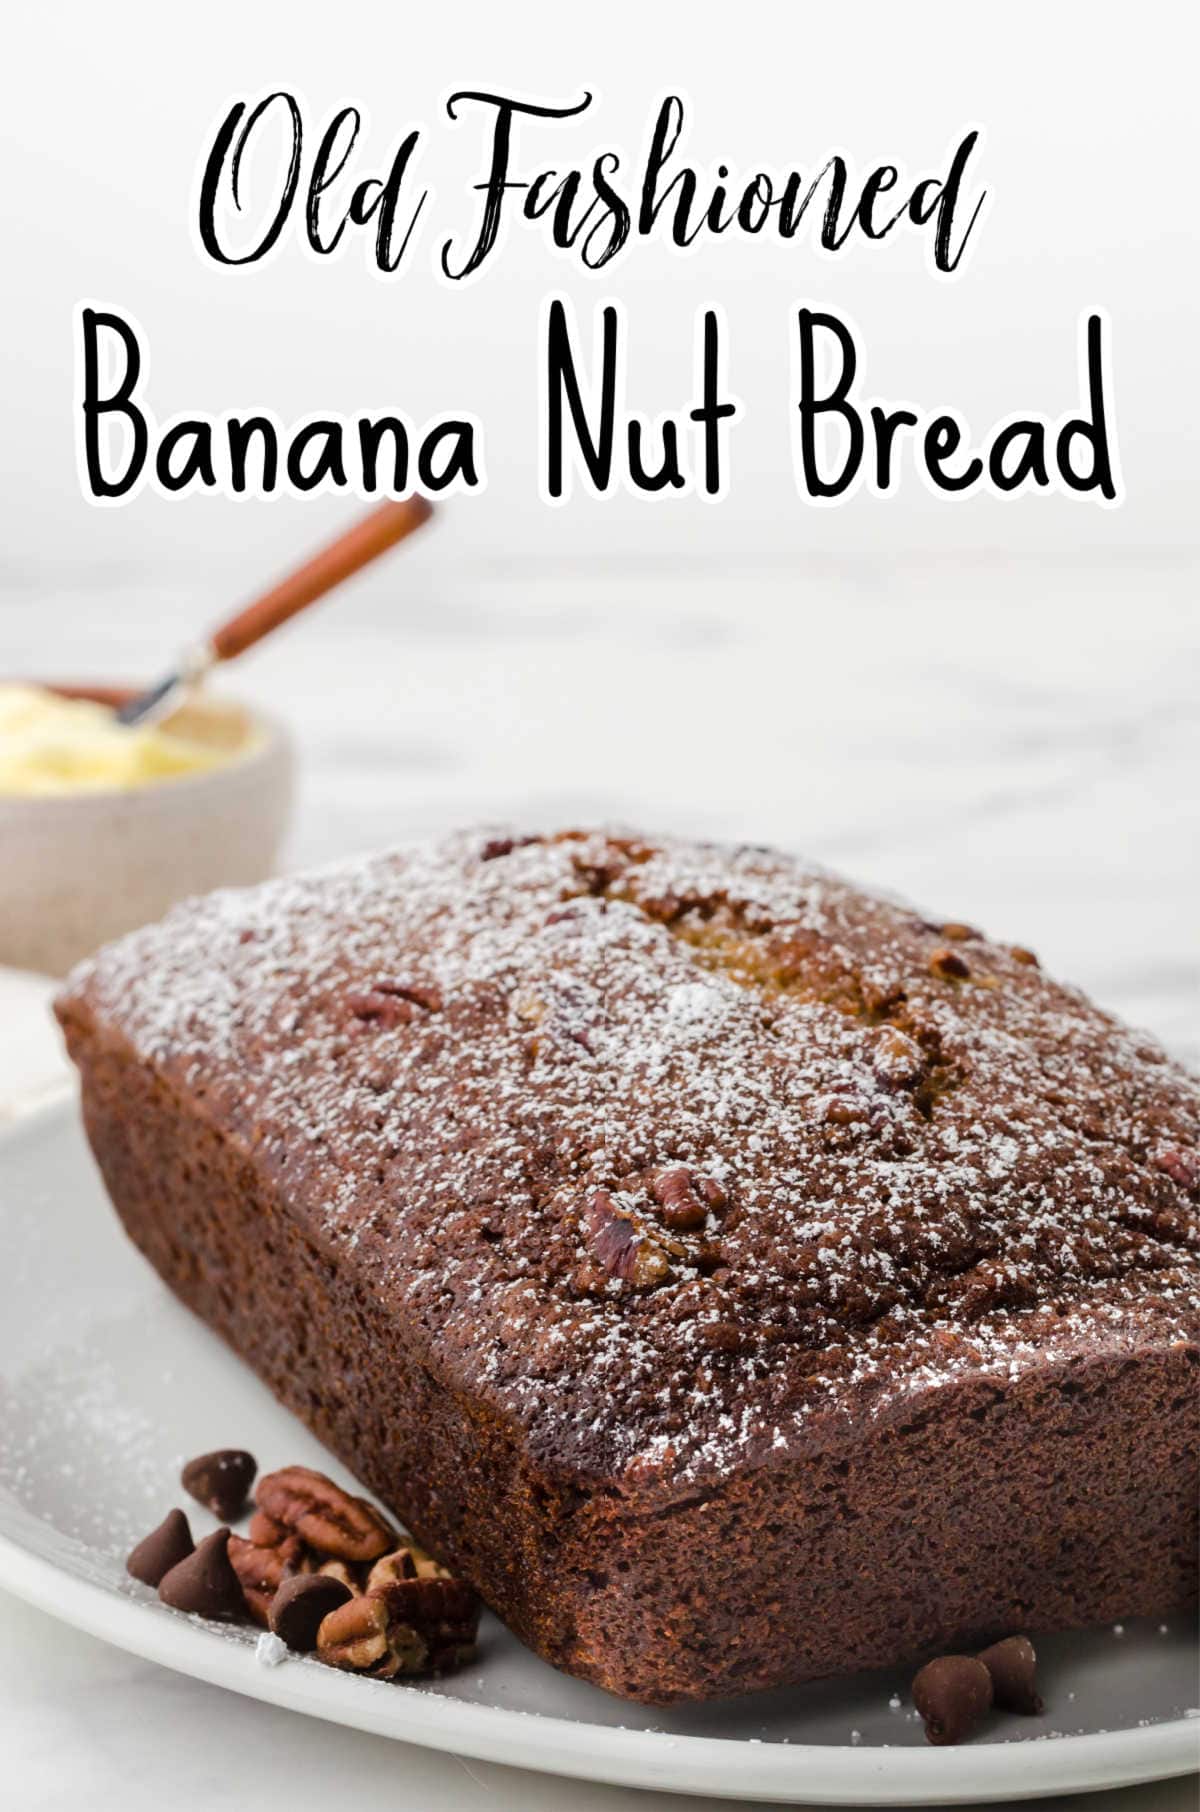 Title image: finished loaf of banana bread with a text overlay.